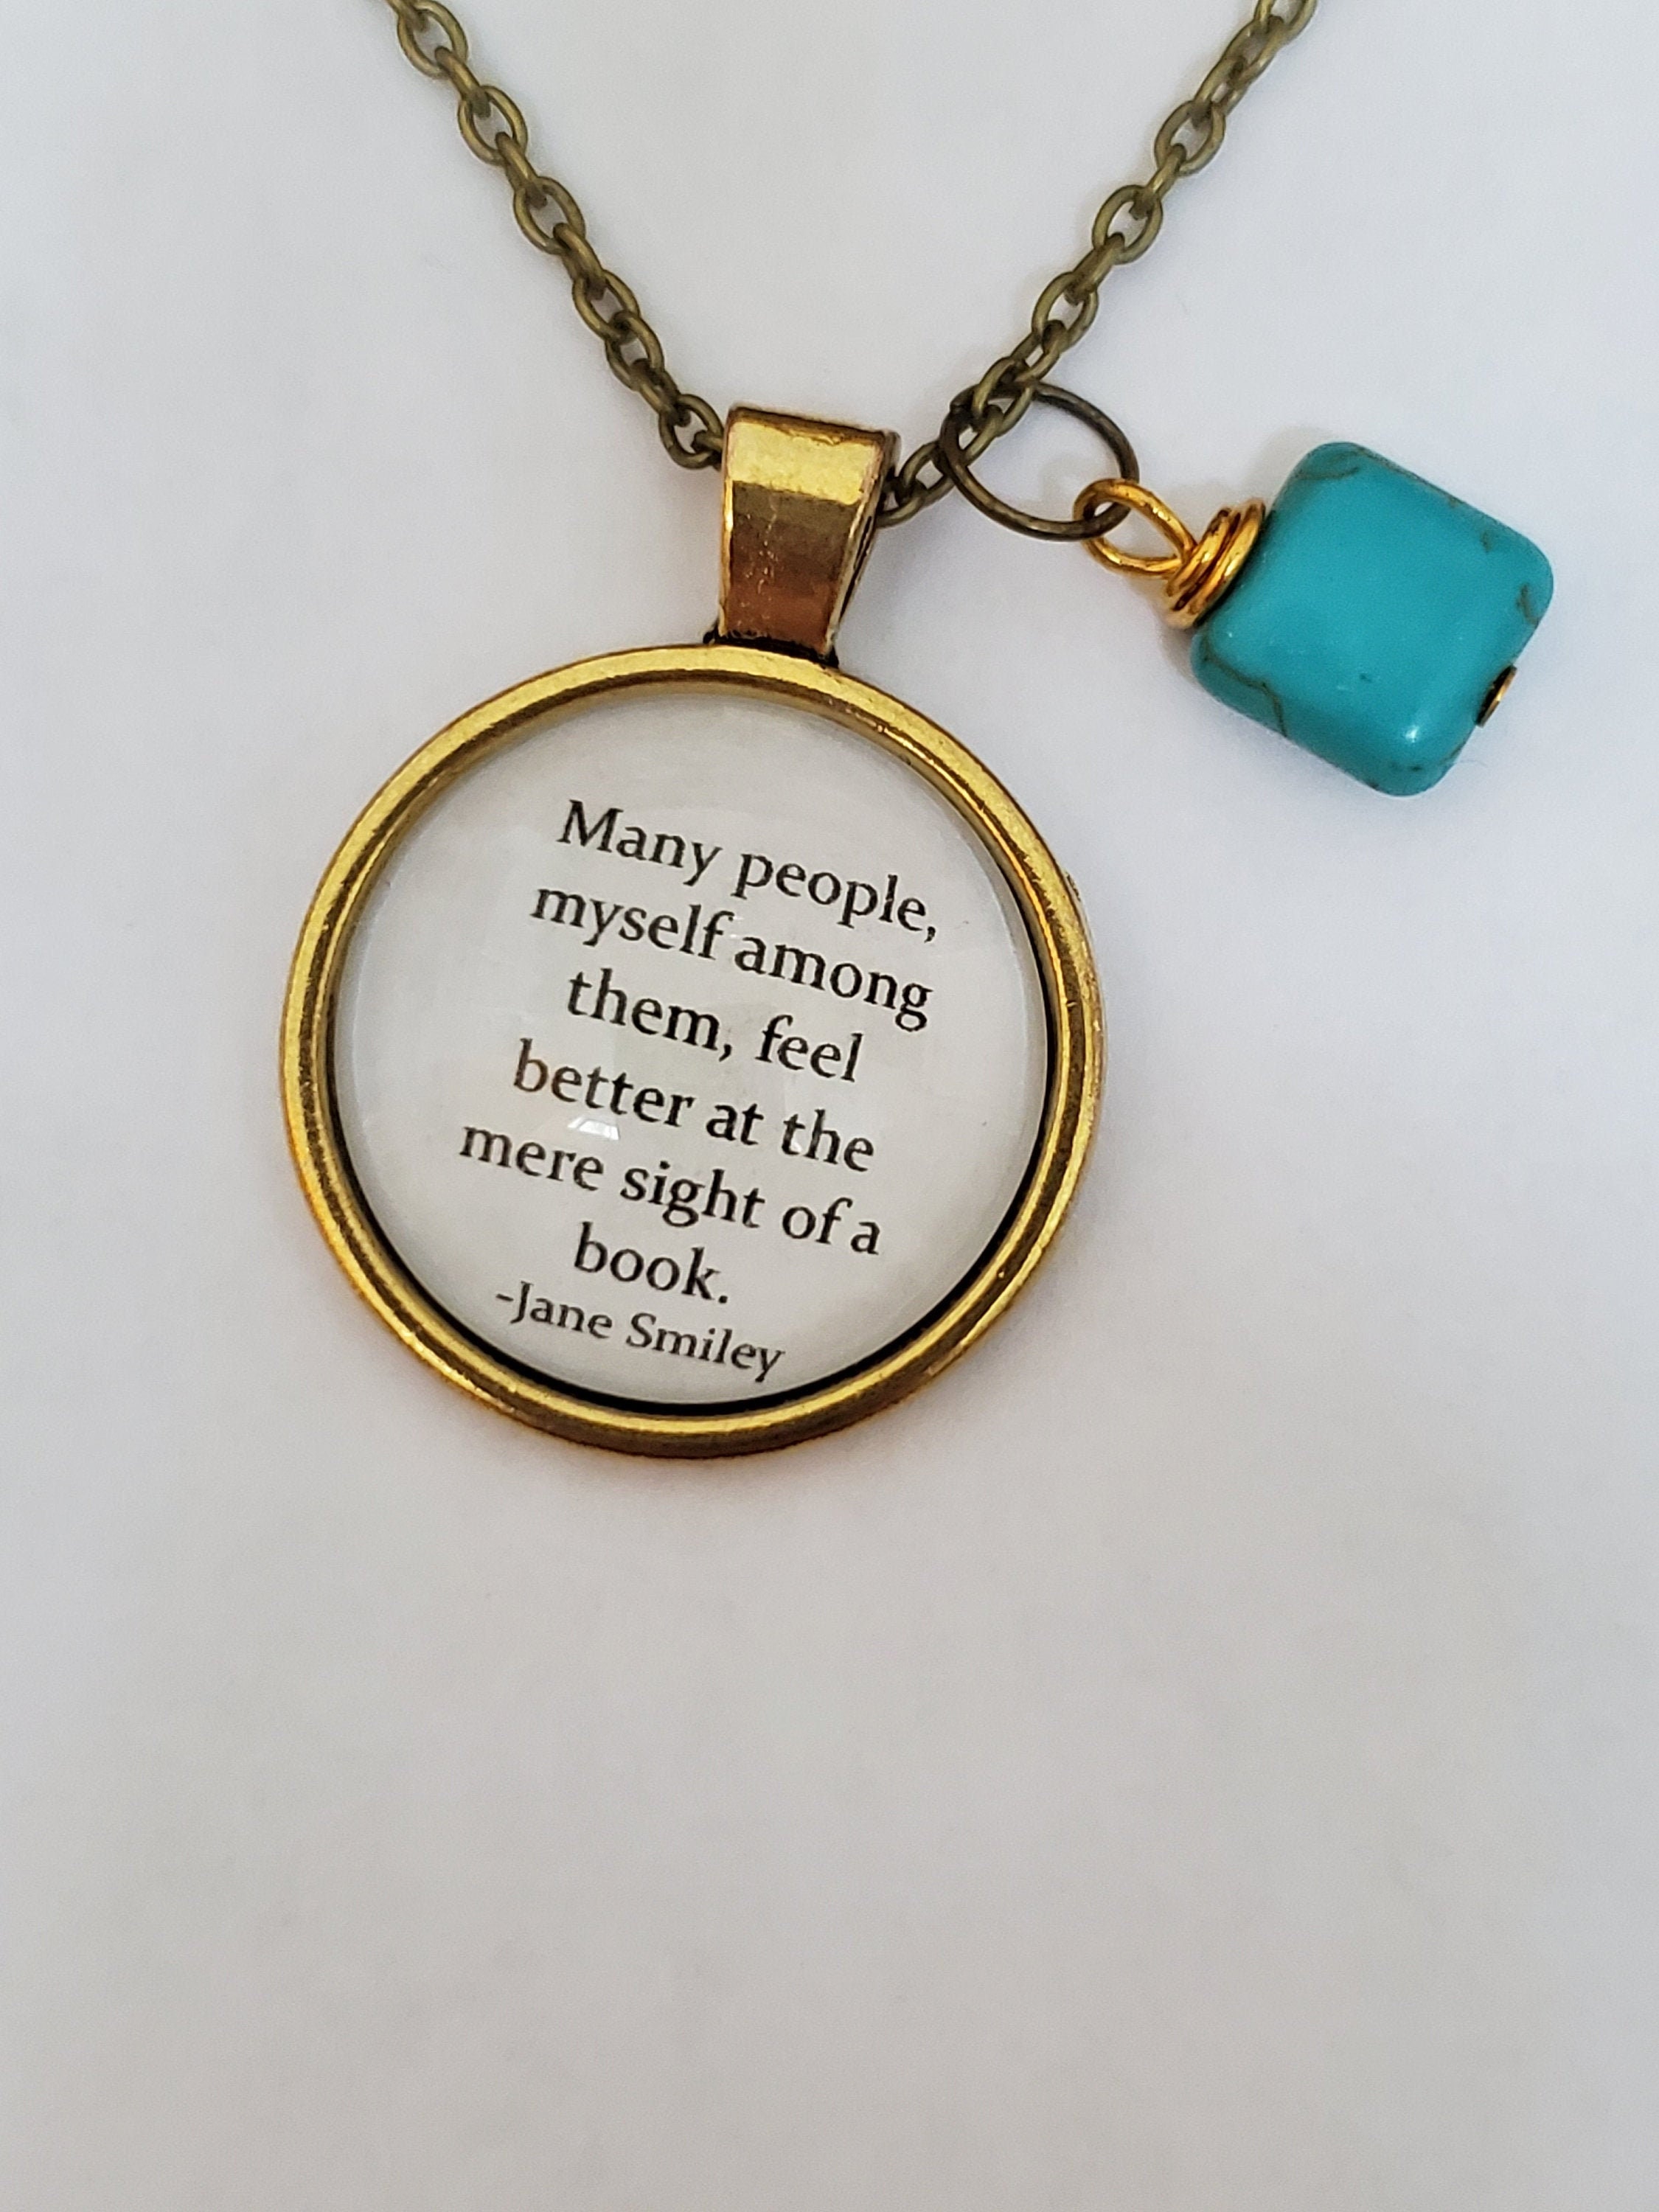 Inspirational Necklace If You Stumble Dance Quote Jewelry Tutu Charm